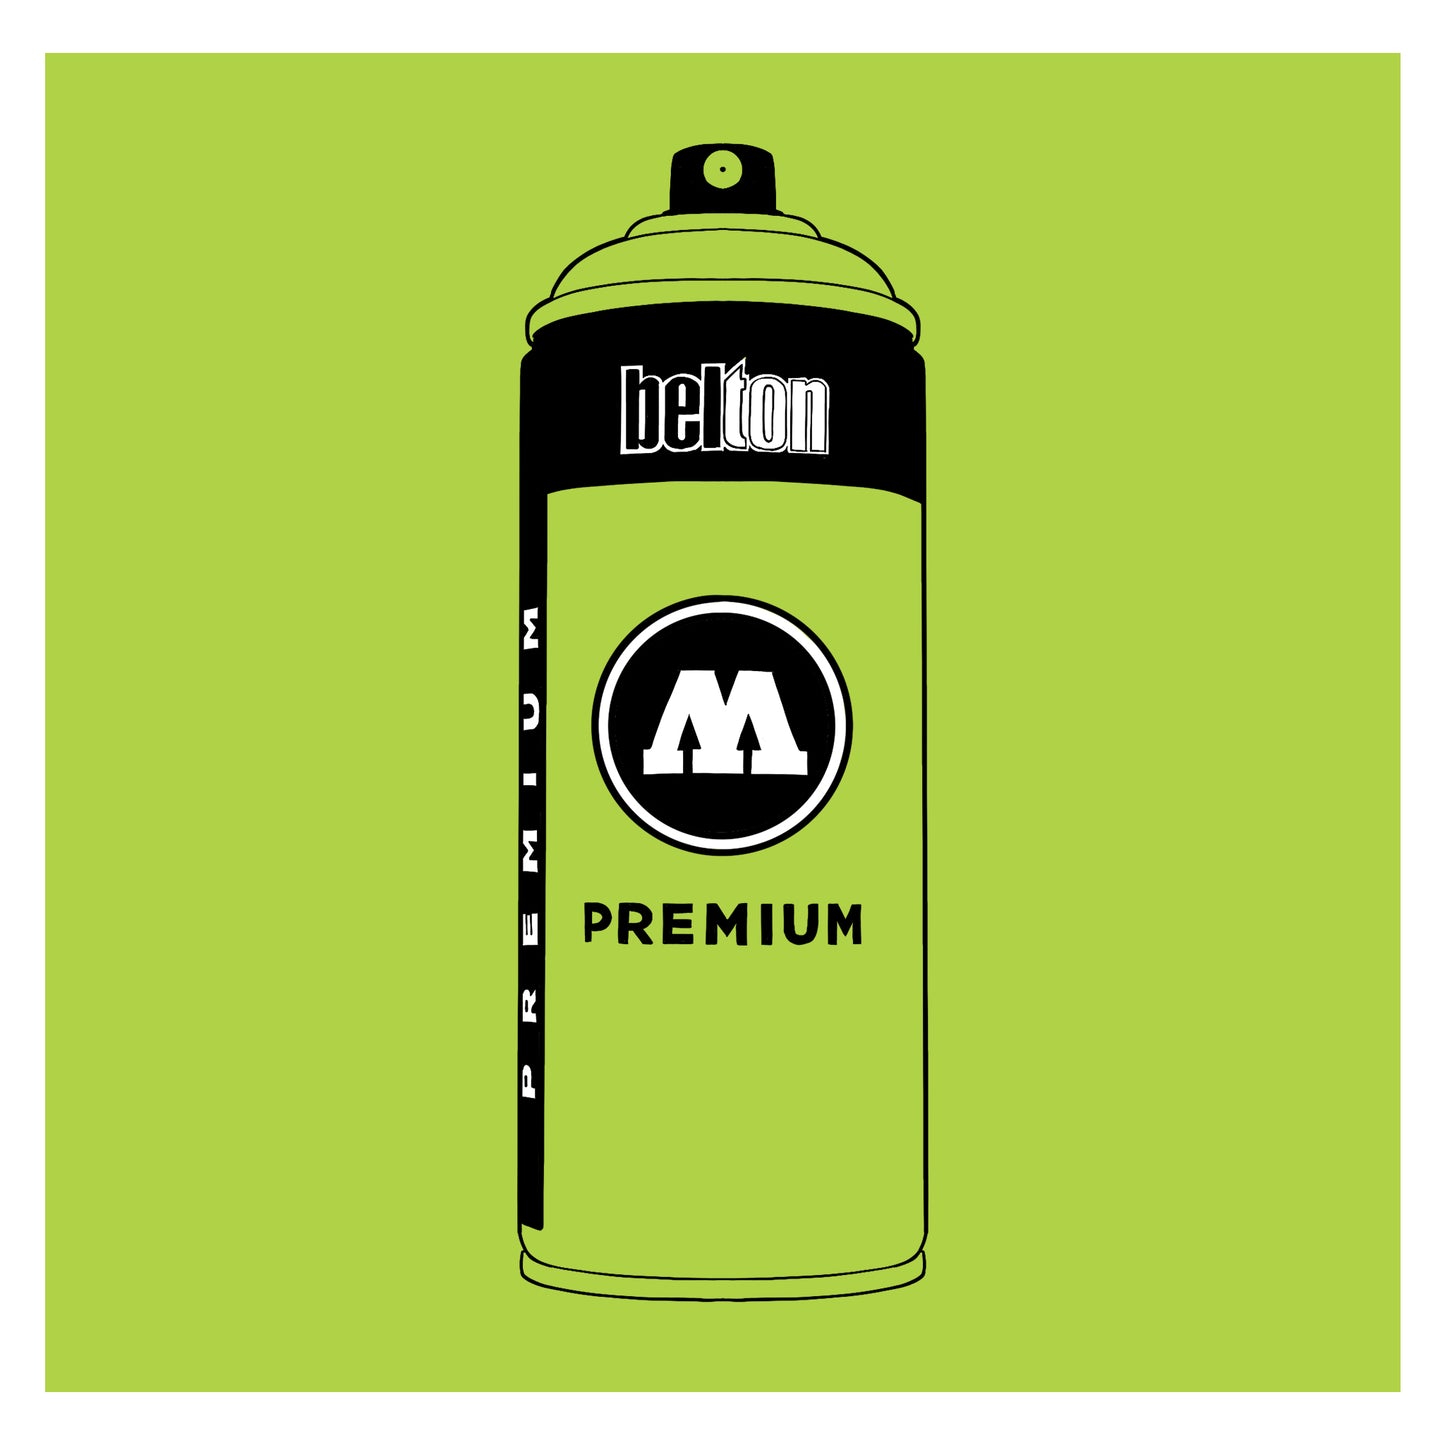 A black outline drawing of a lime green spray paint can with the words "belton","premium" and the letter"M" written on the face in black and white font. The background is a color swatch of the same lime green with a white border